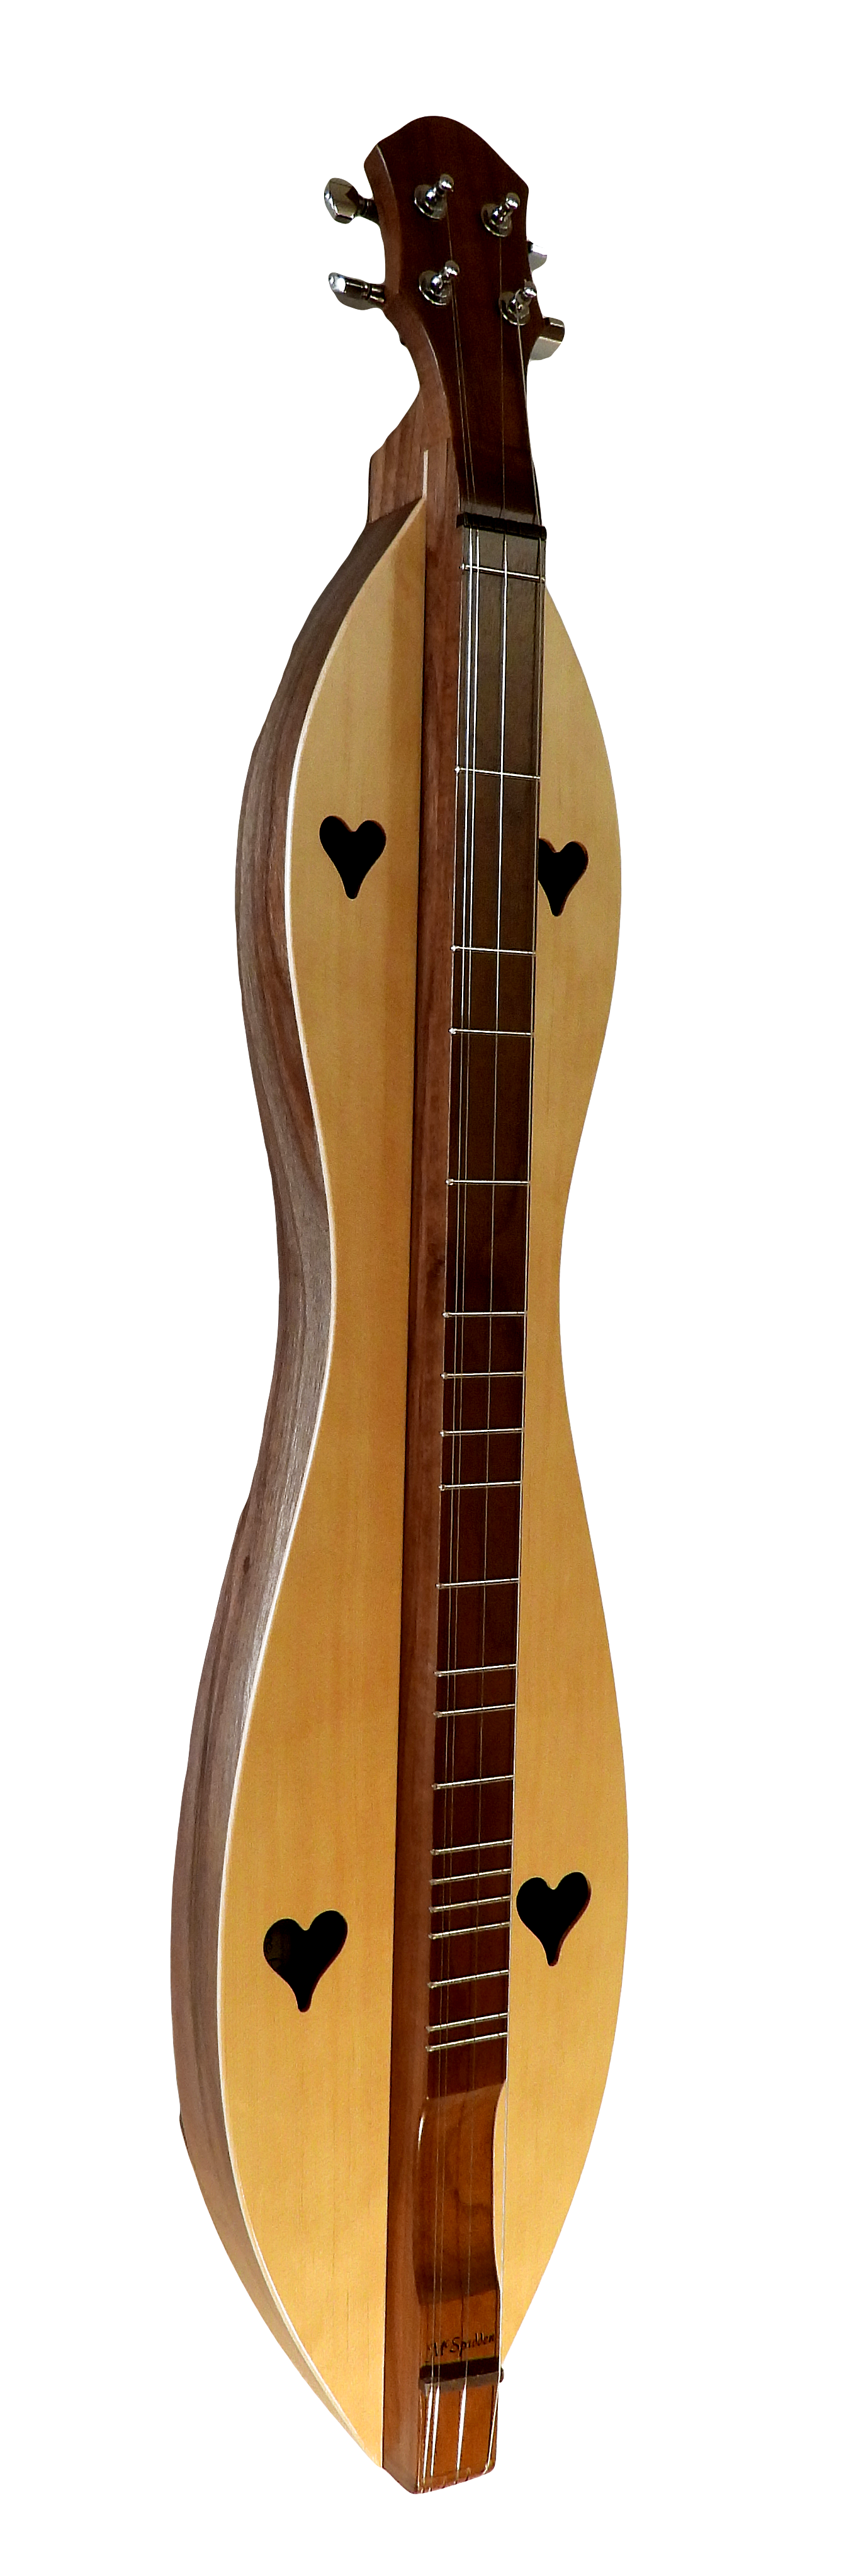 4 String, Flathead, Hourglass with Walnut back, sides and Spruce top (4FH26WS) Image shown with upgraded Ebony fretboard